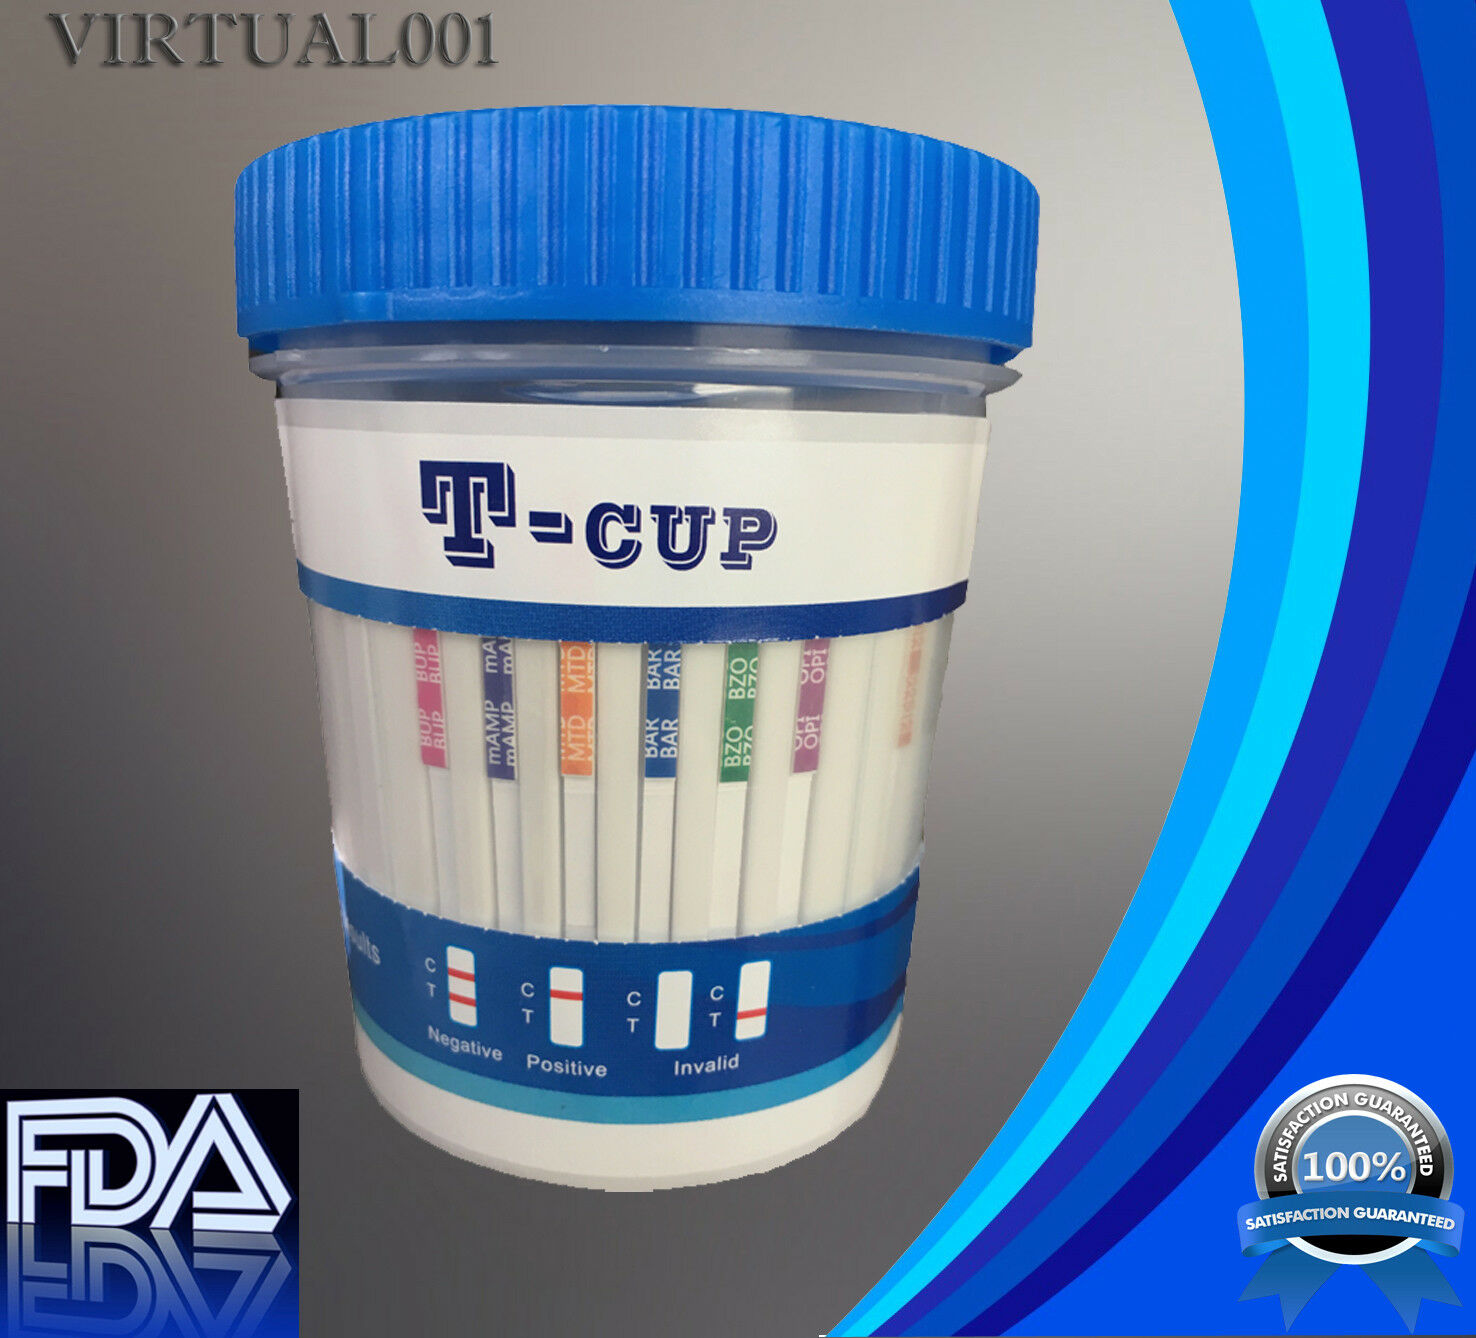 12 Panel Drug Test Cup -test For 12 Drugs- Fda  Clia - Lots As Low As $2.49/ Cup